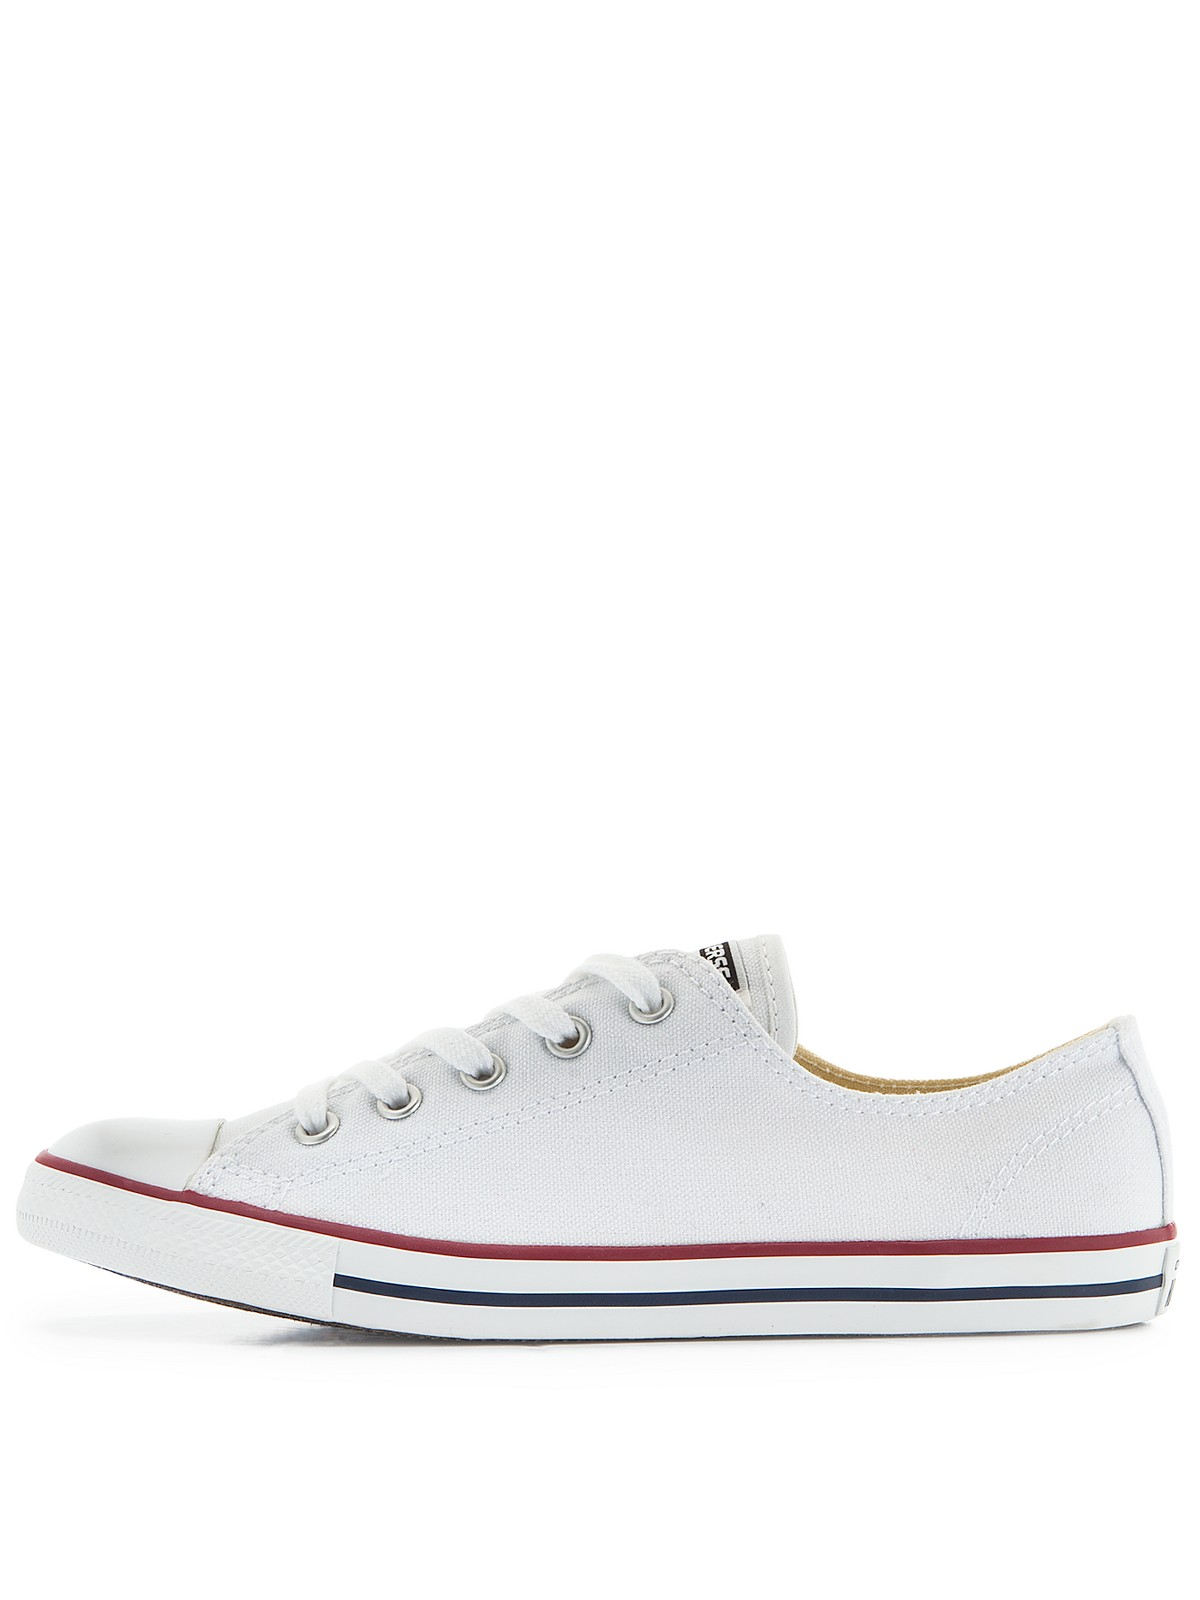 Converse Chuck Taylor All Star Dainty Leather Trainers in White for Men ...